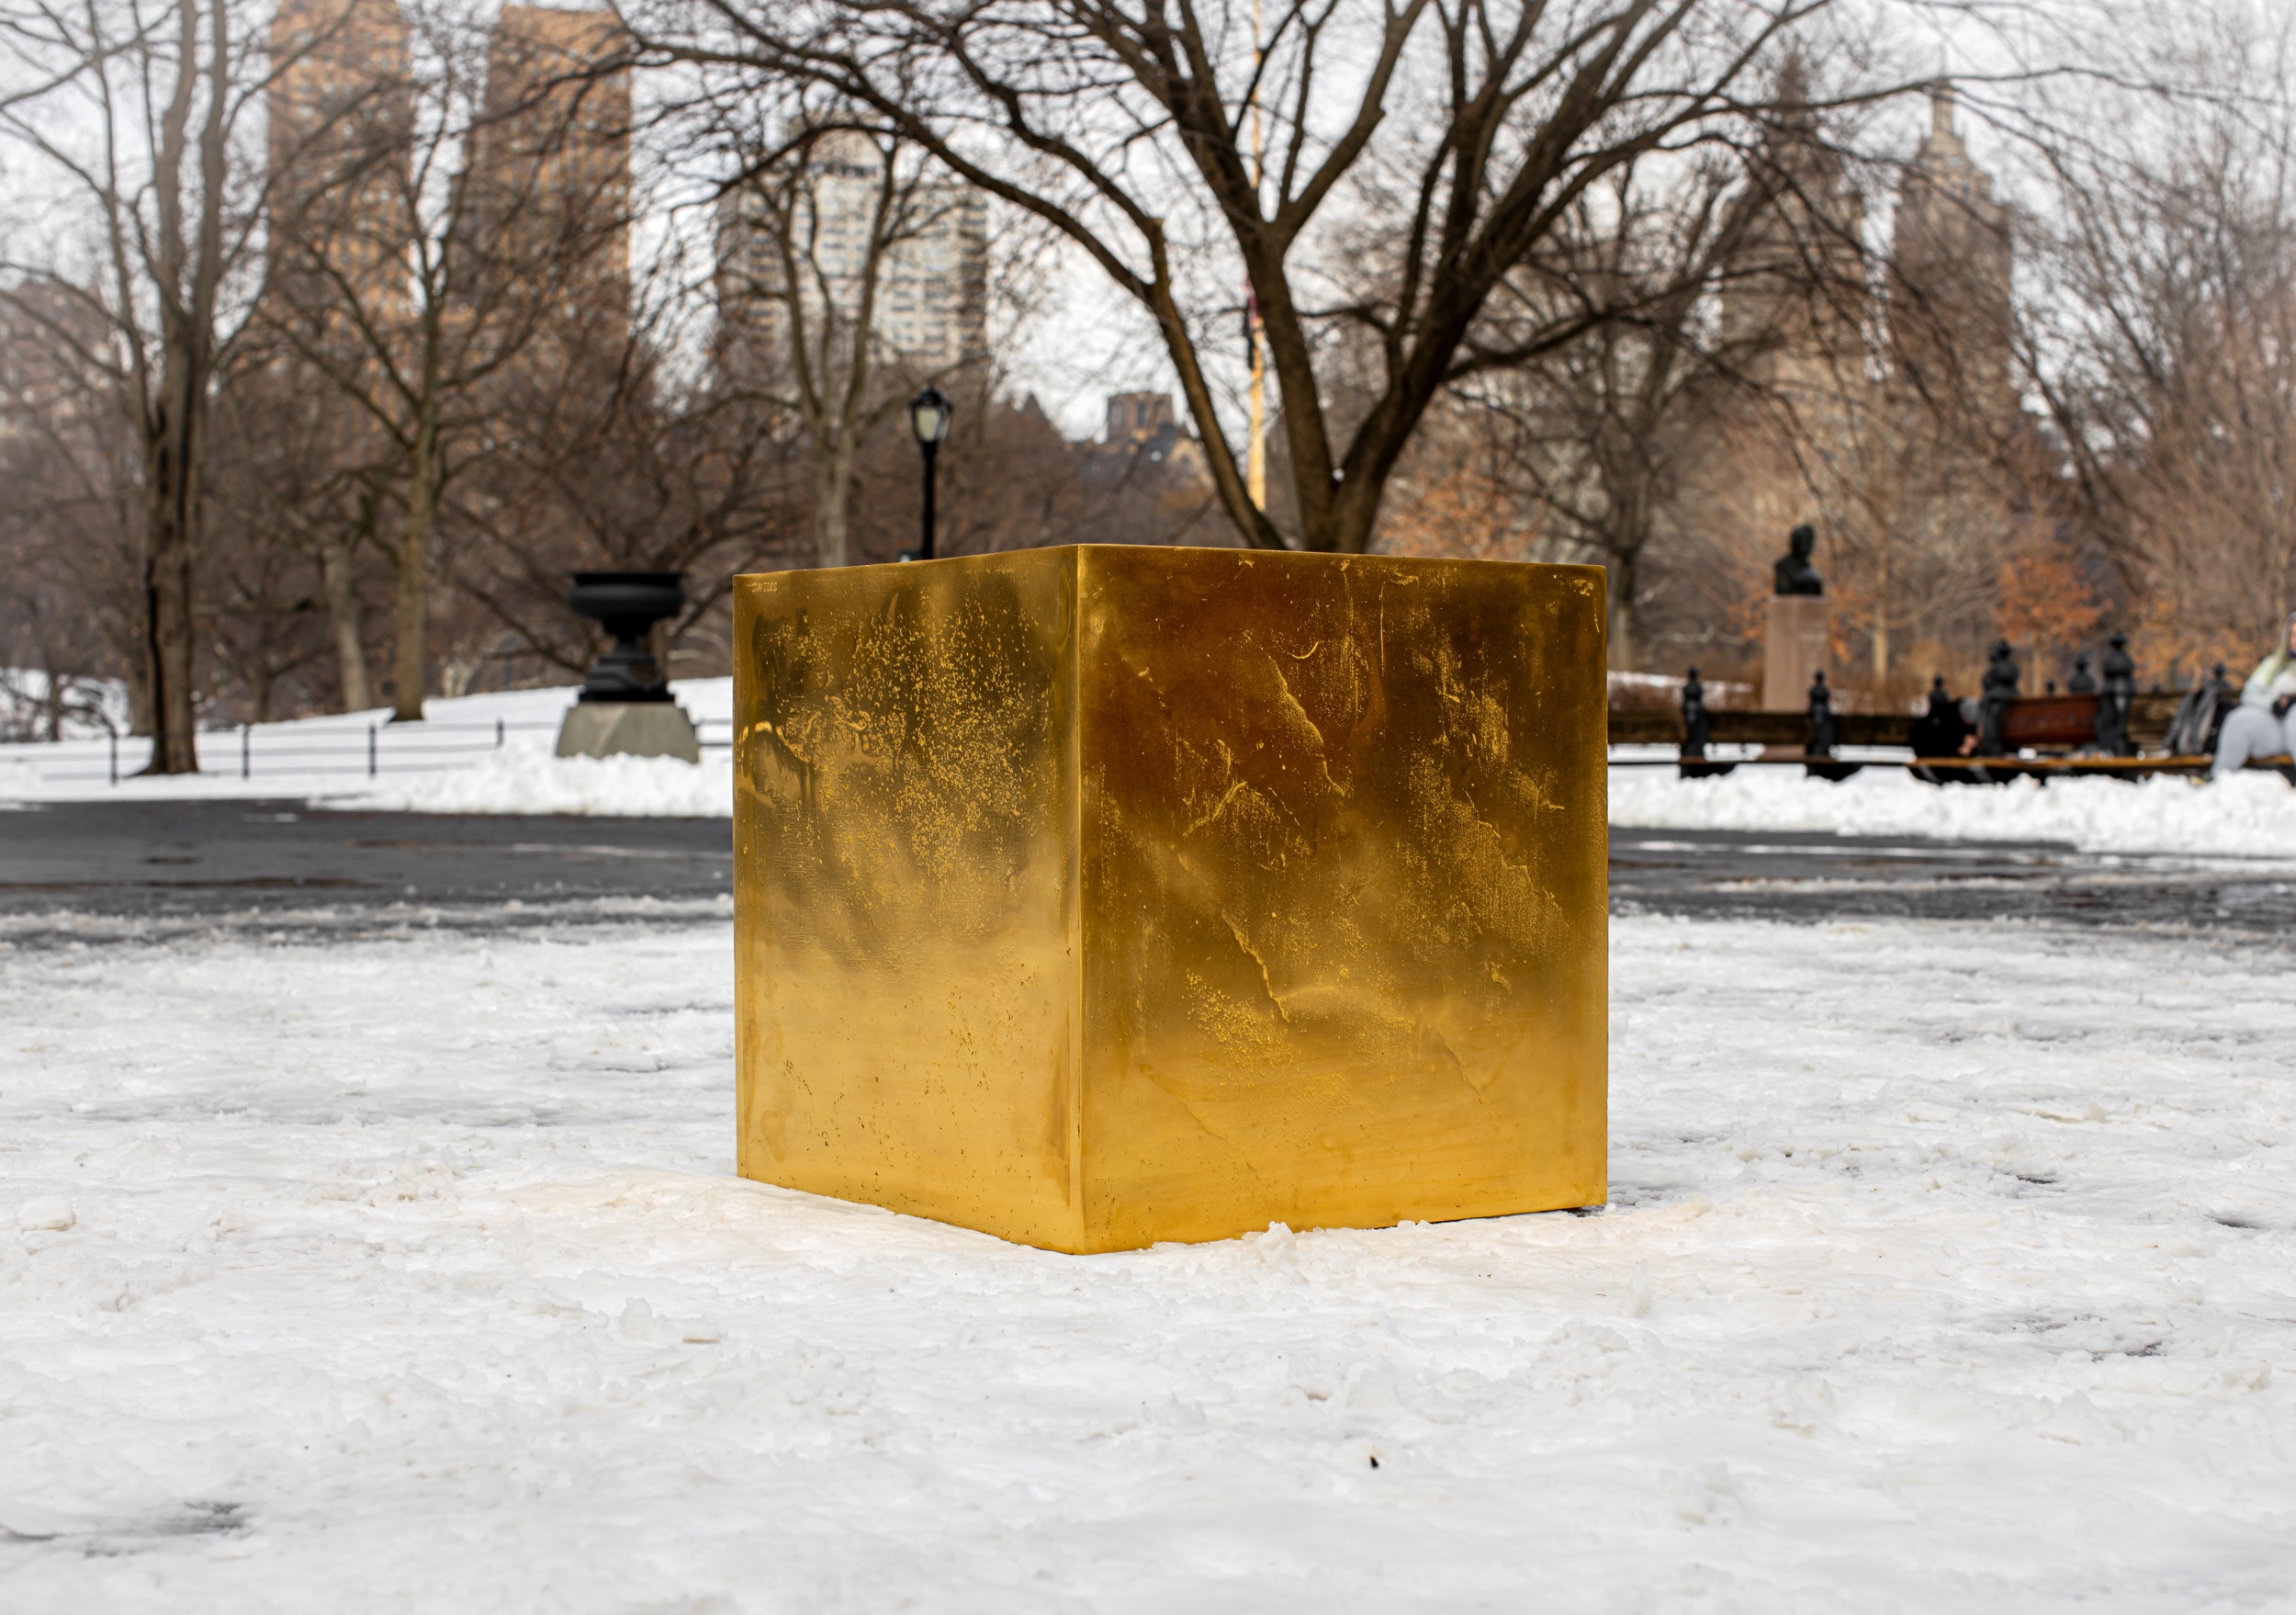 The Castello CUBE attracted worldwide attention when the golden cube by artist Niclas Castello was shown first in New York's Central Park / Editorial use of this picture is free of charge. Please quote the source: 